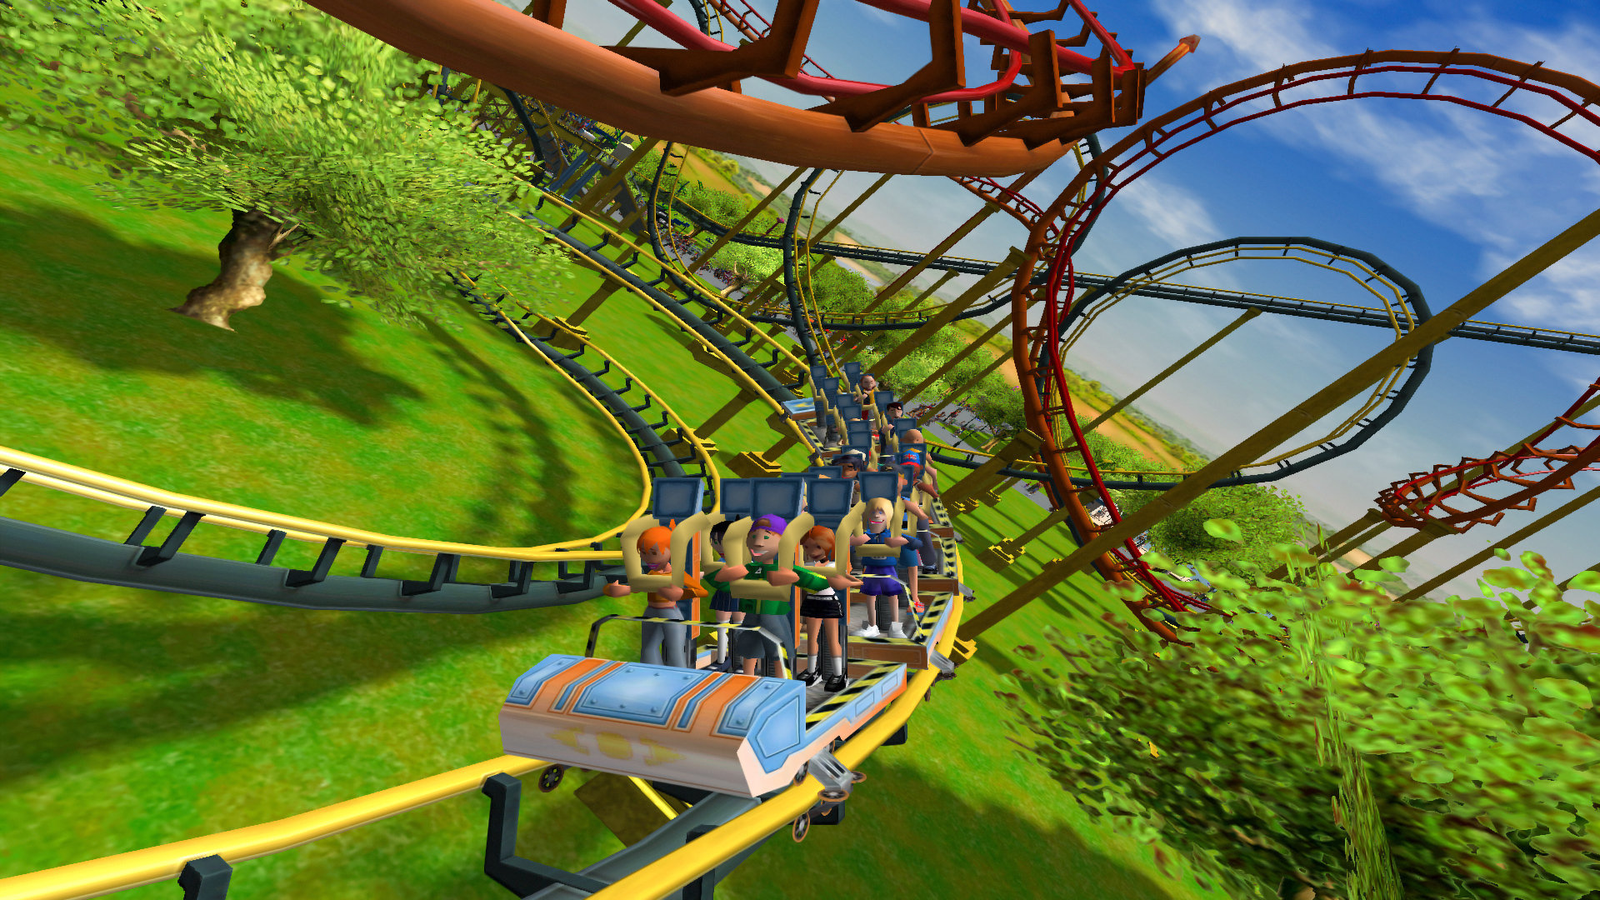 Rollercoaster Tycoon 3 - Gameplay HD (1080p) 